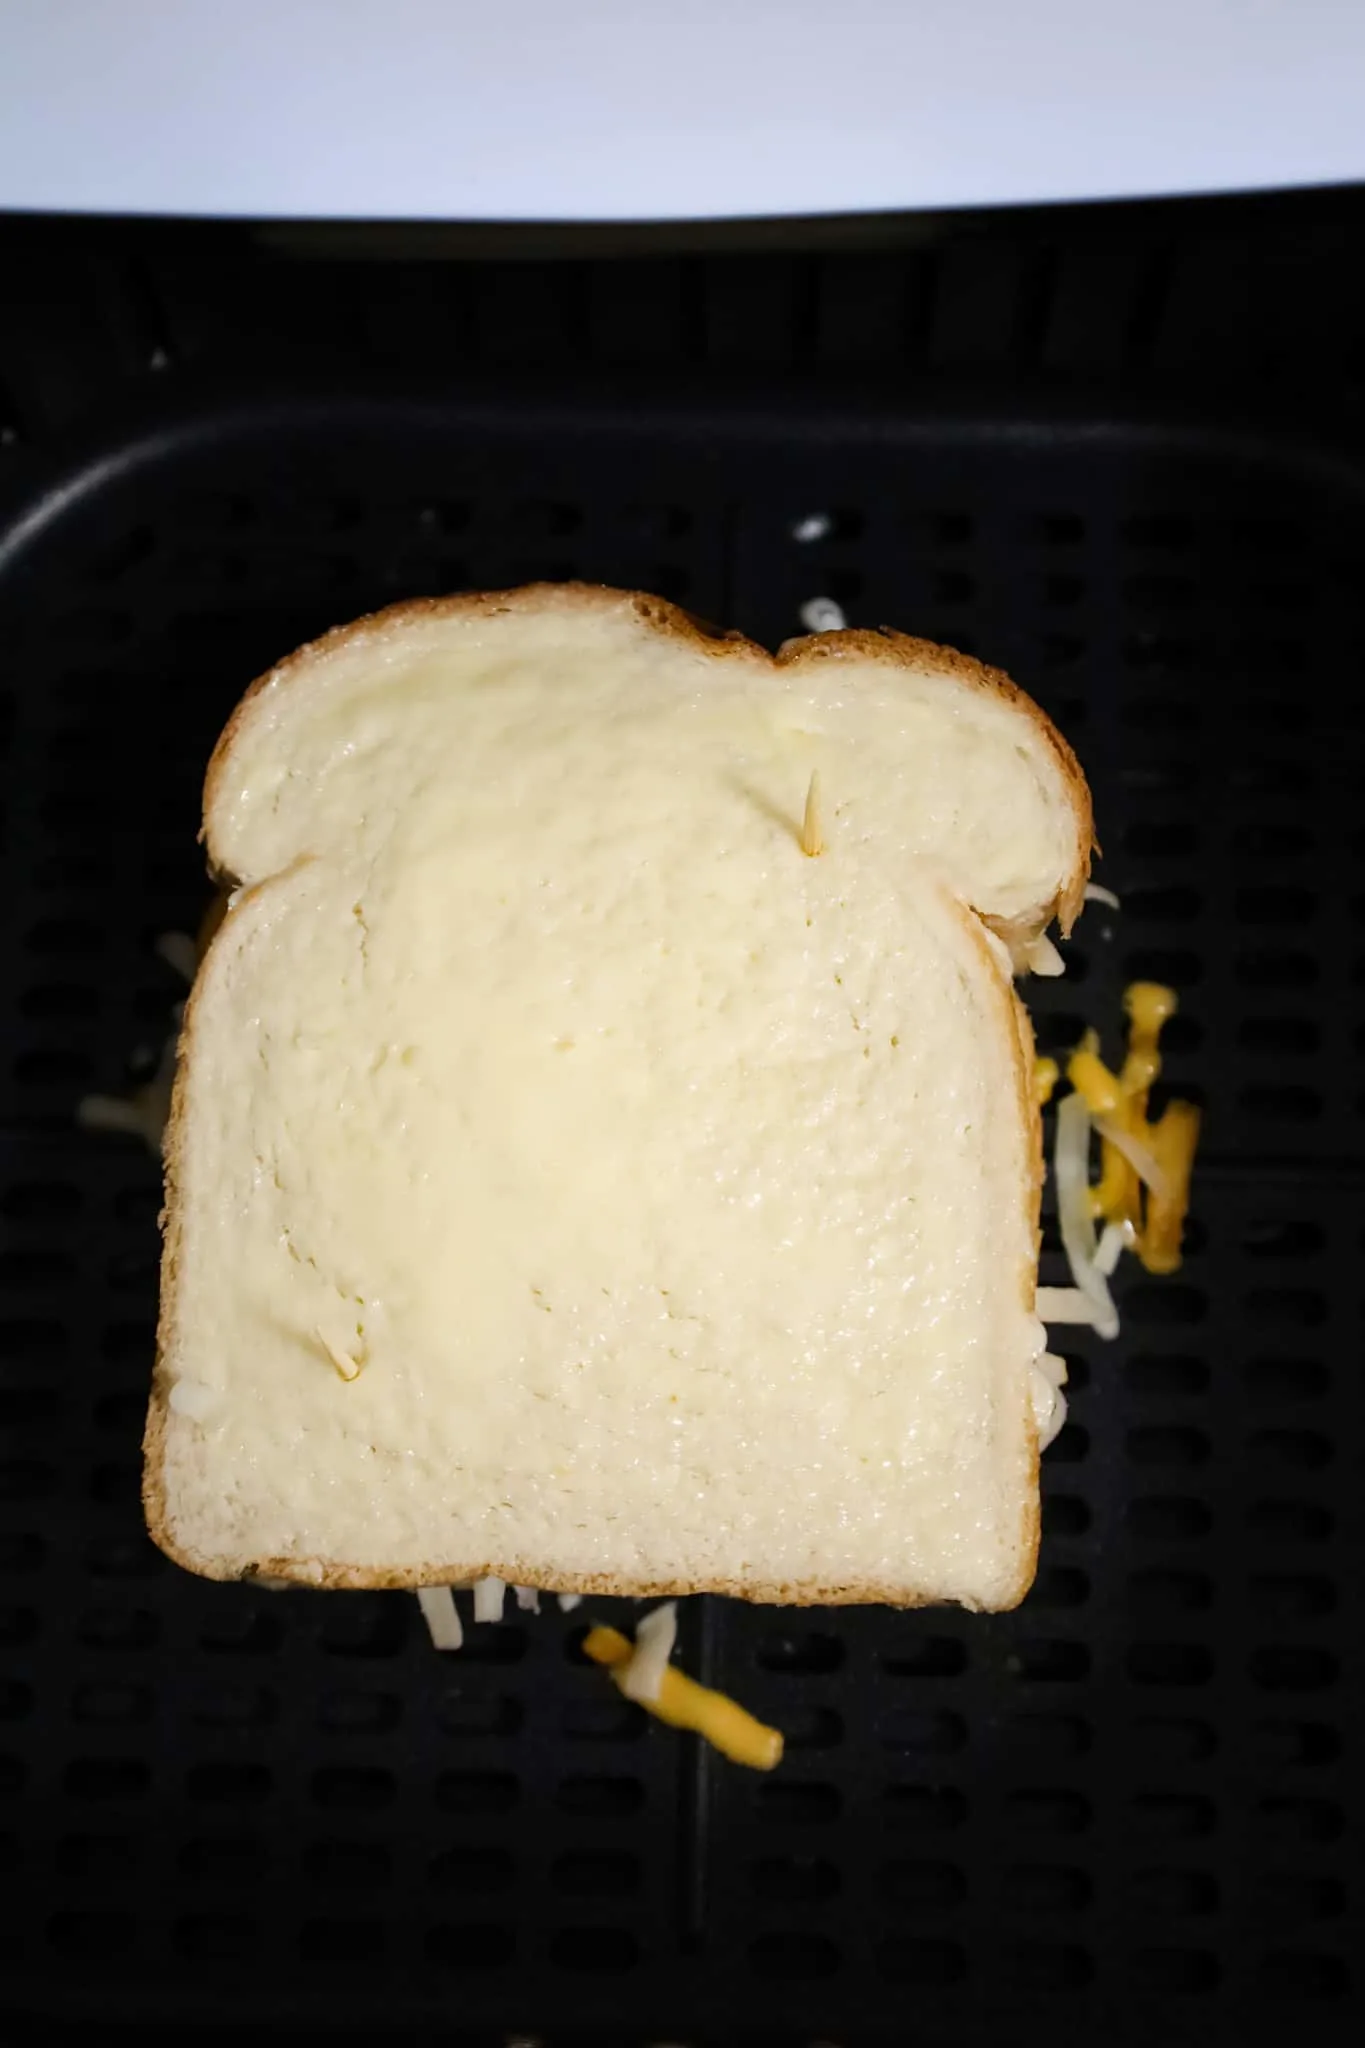 grilled cheese sandwich in air fryer basket before air frying